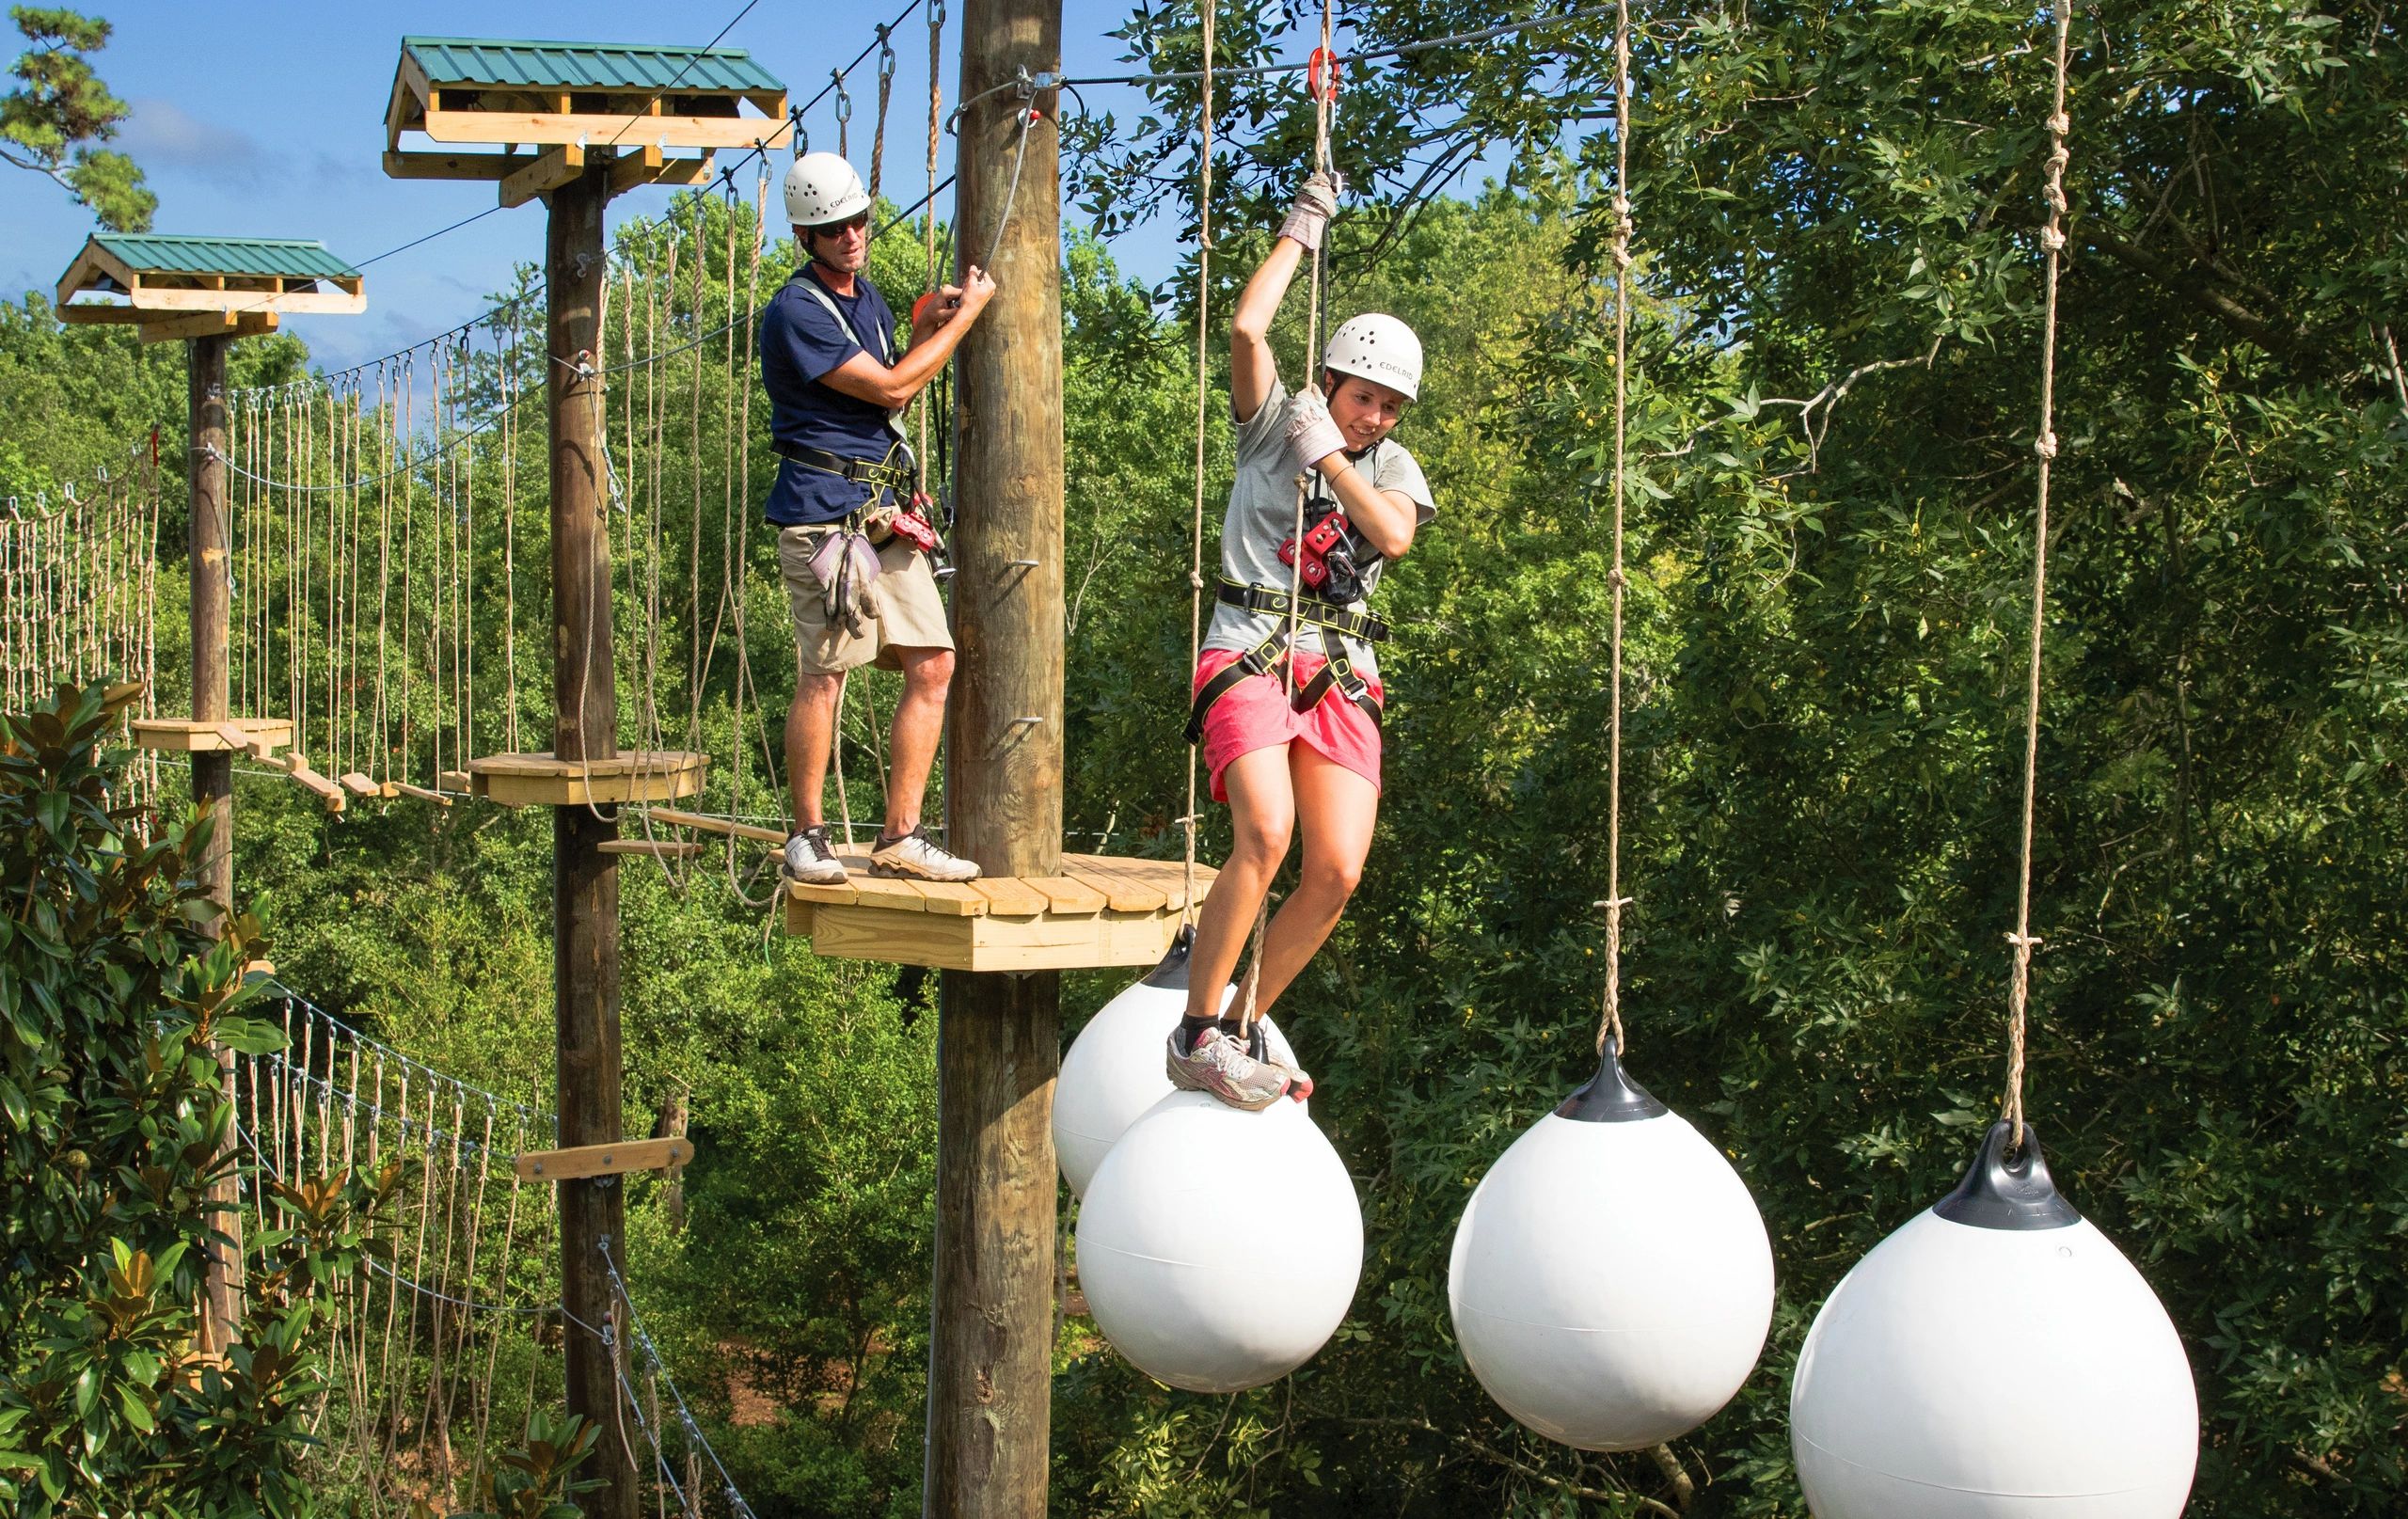 Low Ropes Course Elements